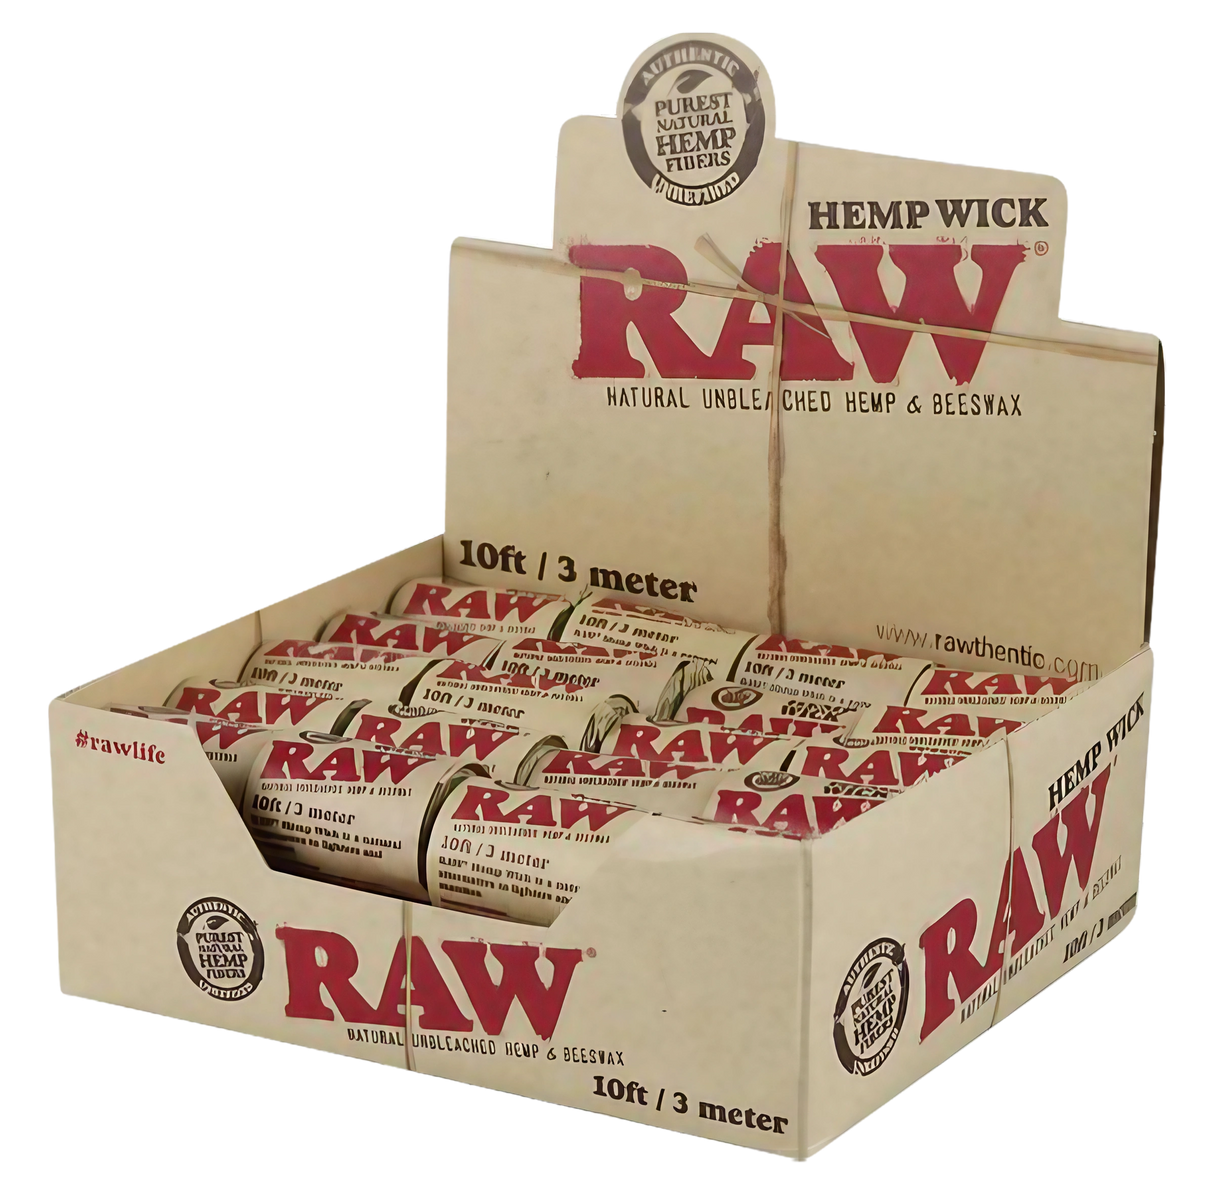 Box of 40 RAW Natural Hemp Wick 10ft Rolls for Dab Rigs, Unbleached Hemp Material